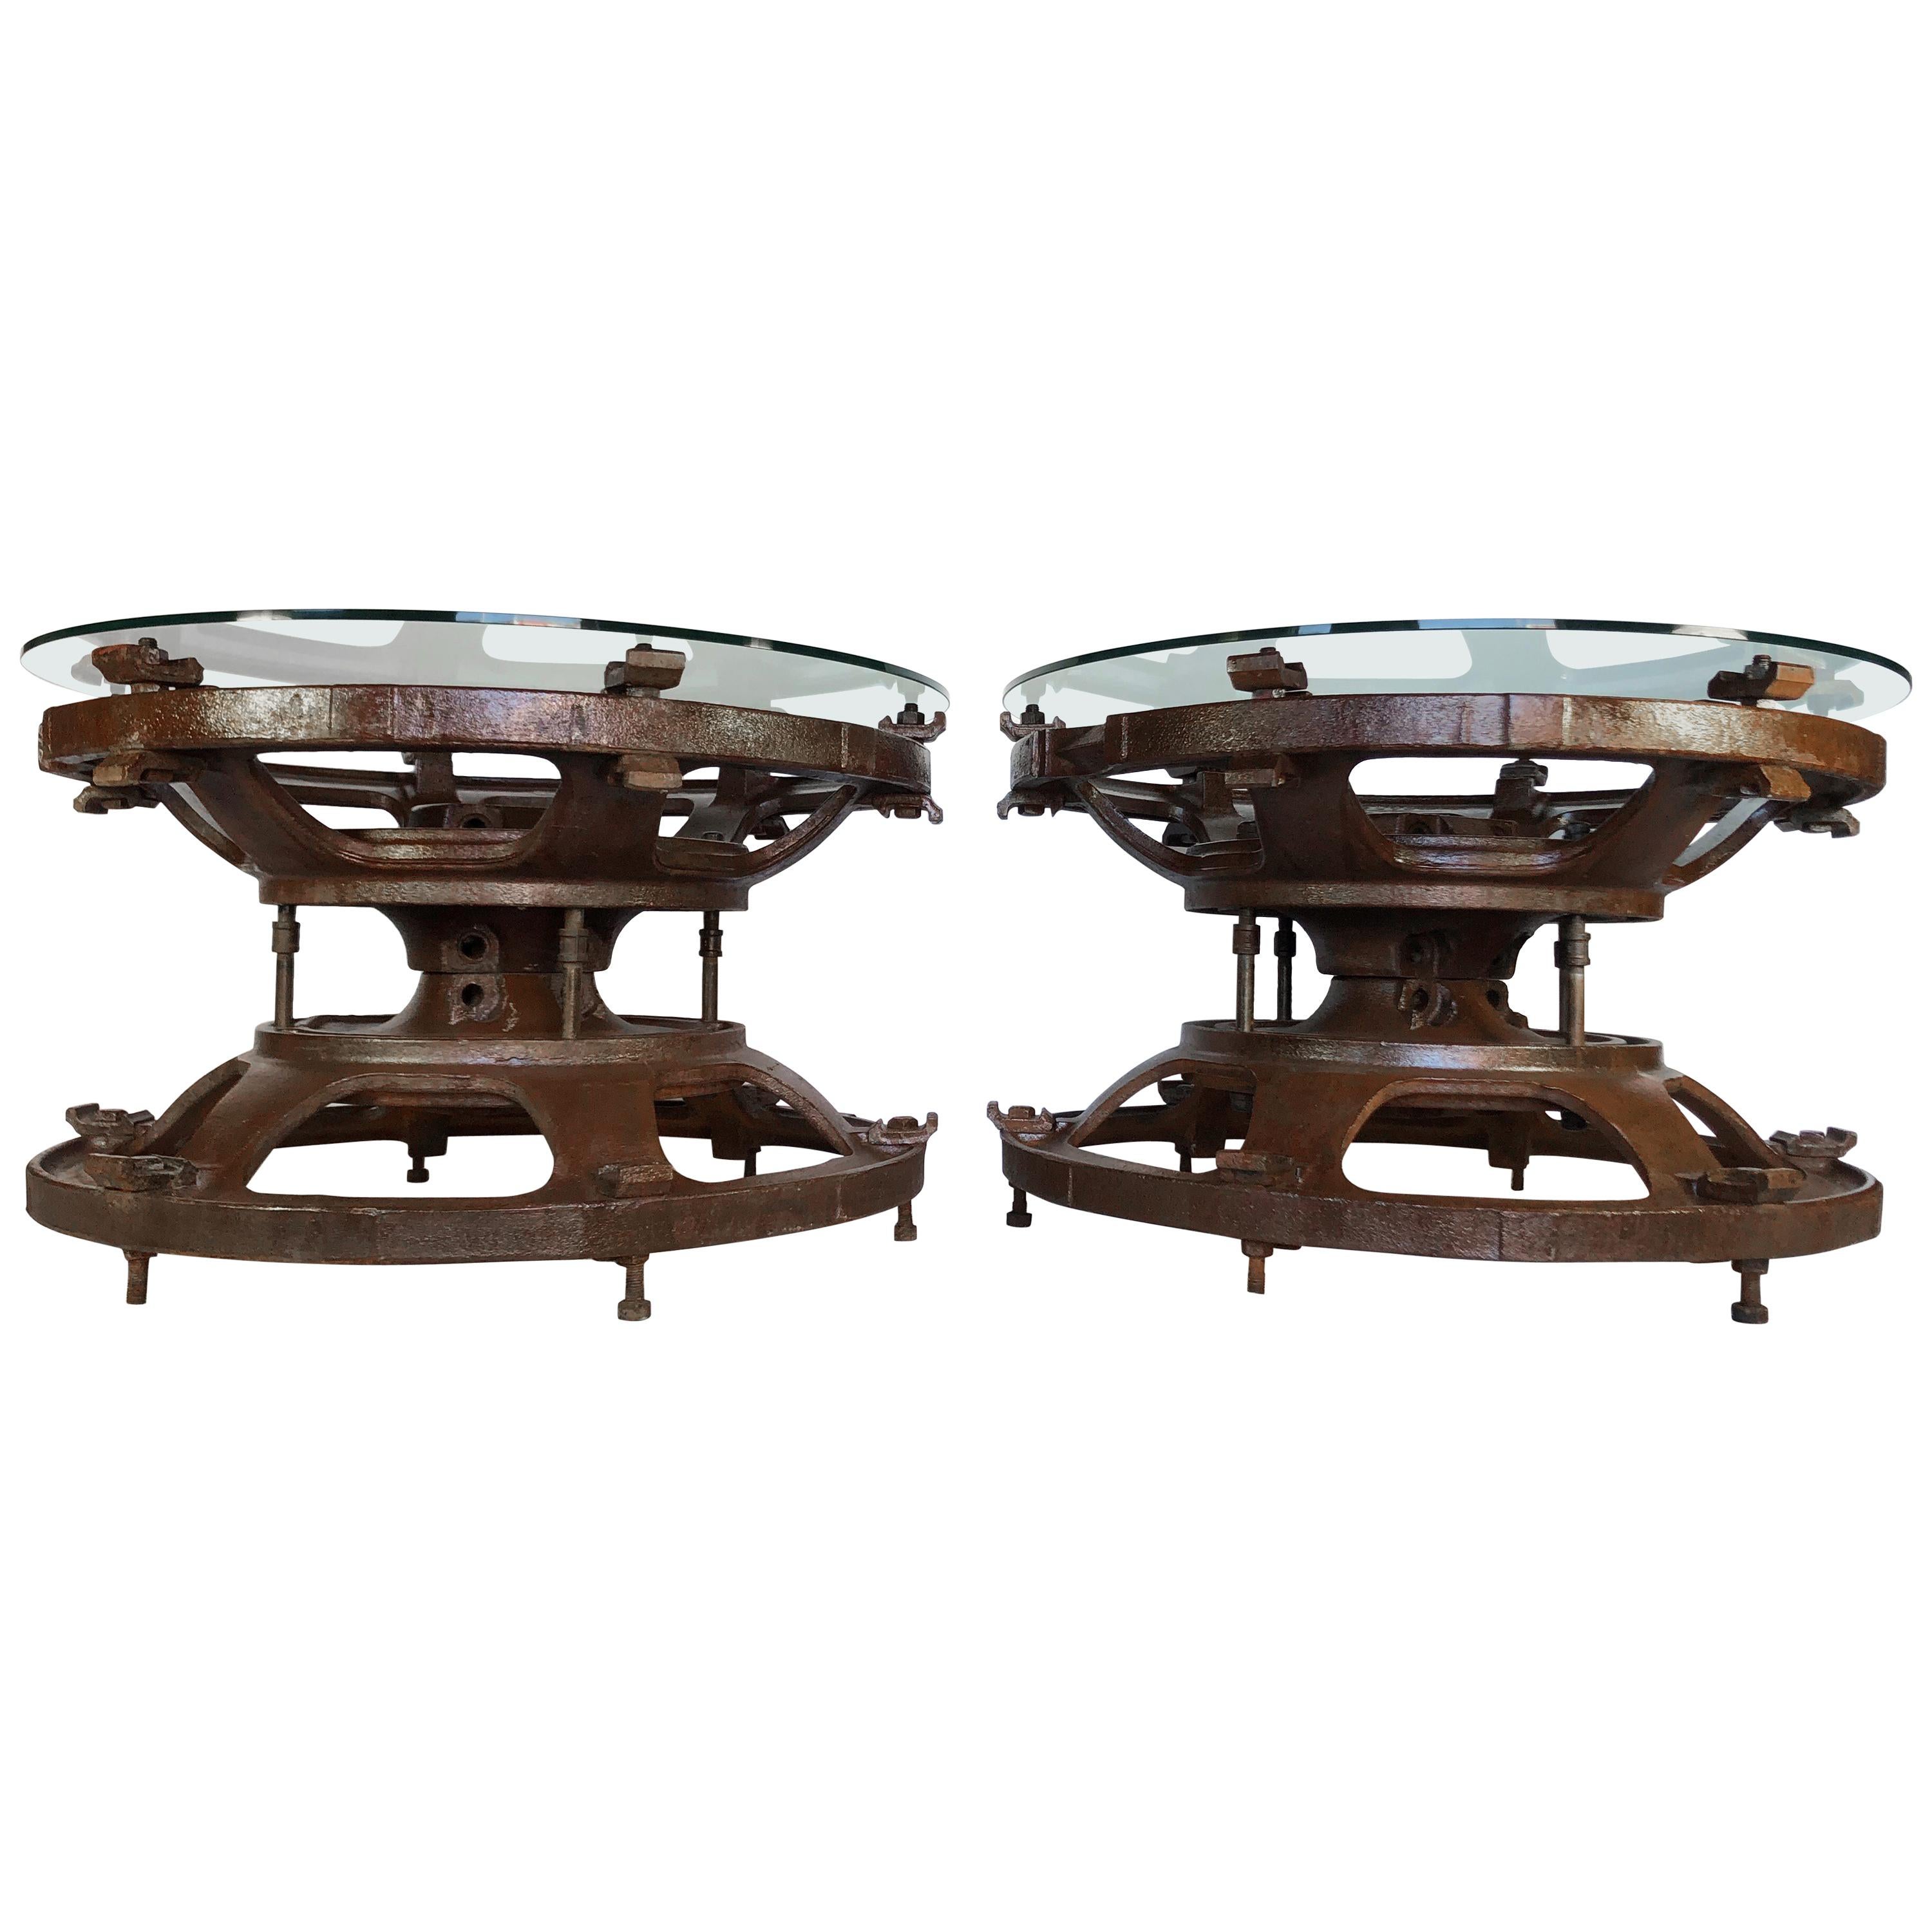 Pair of Industrial Tractor Wheel Tables For Sale